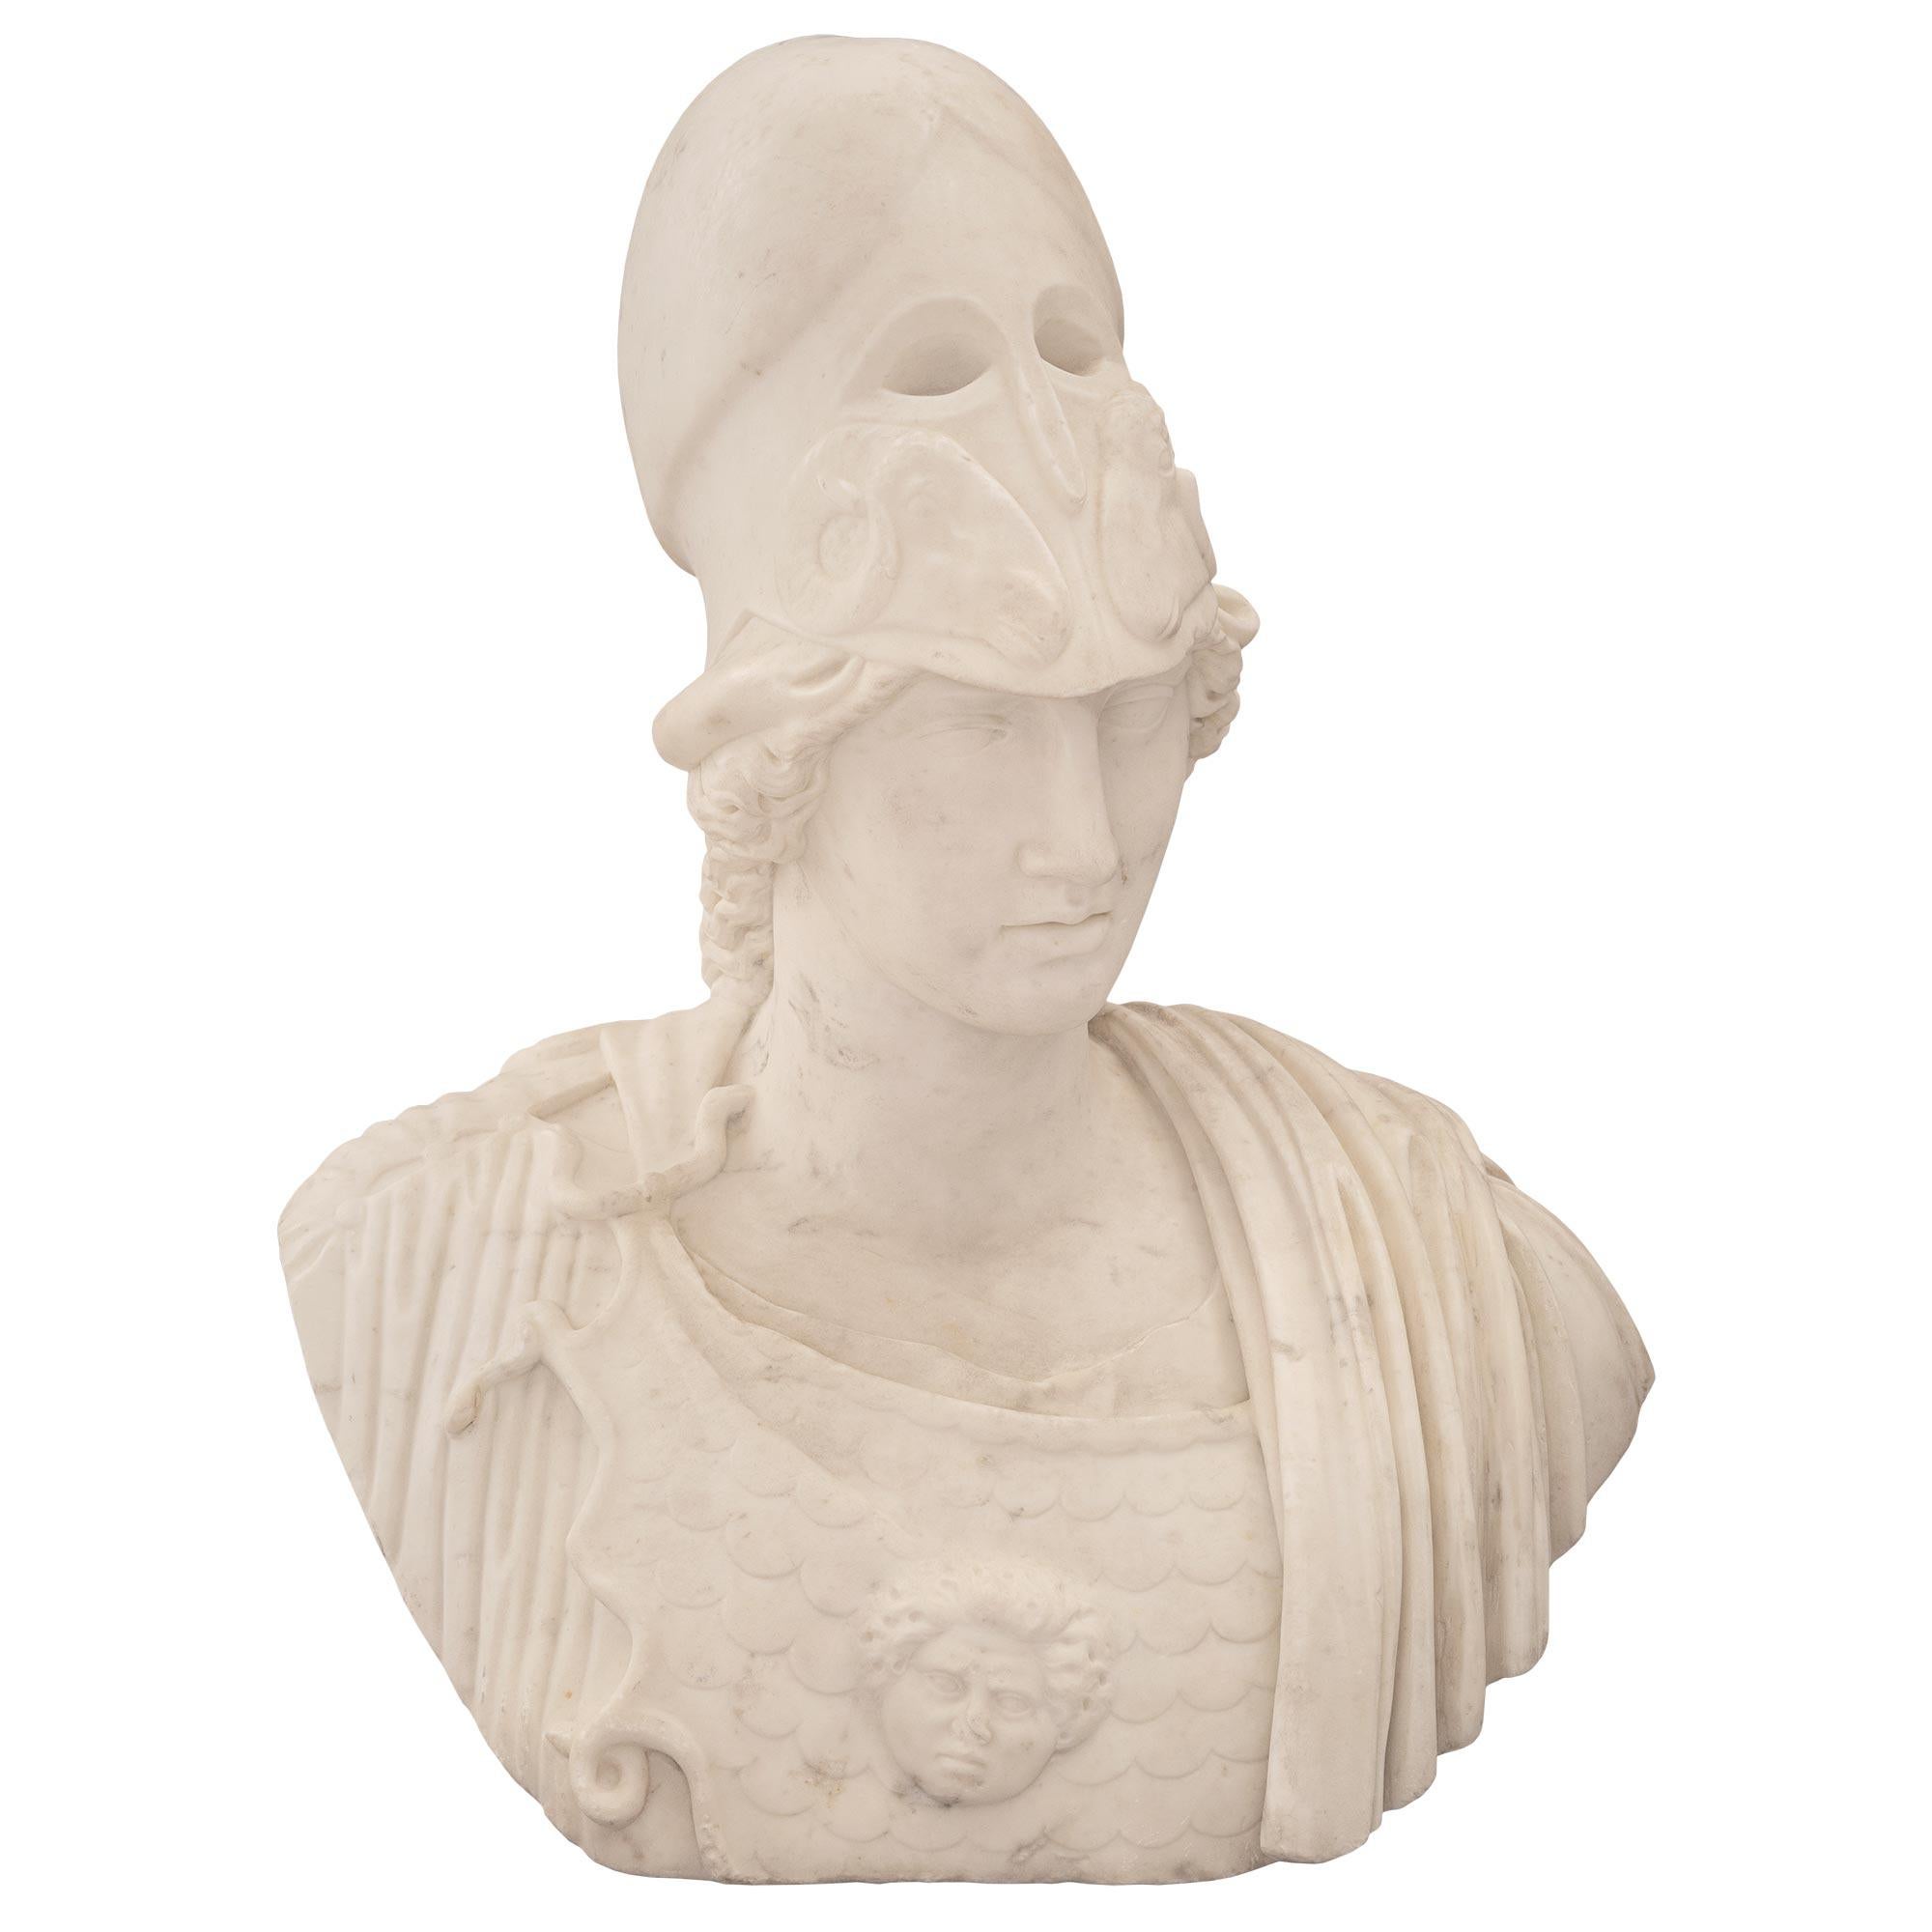 A stunning and most impressive Italian 19th century white Carrara marble bust of Athena of Velletri. The bust depicts the beautiful Athena in her armor with a wonderfully executed cloak draped over her shoulder. She wears her distinctive Corinthian